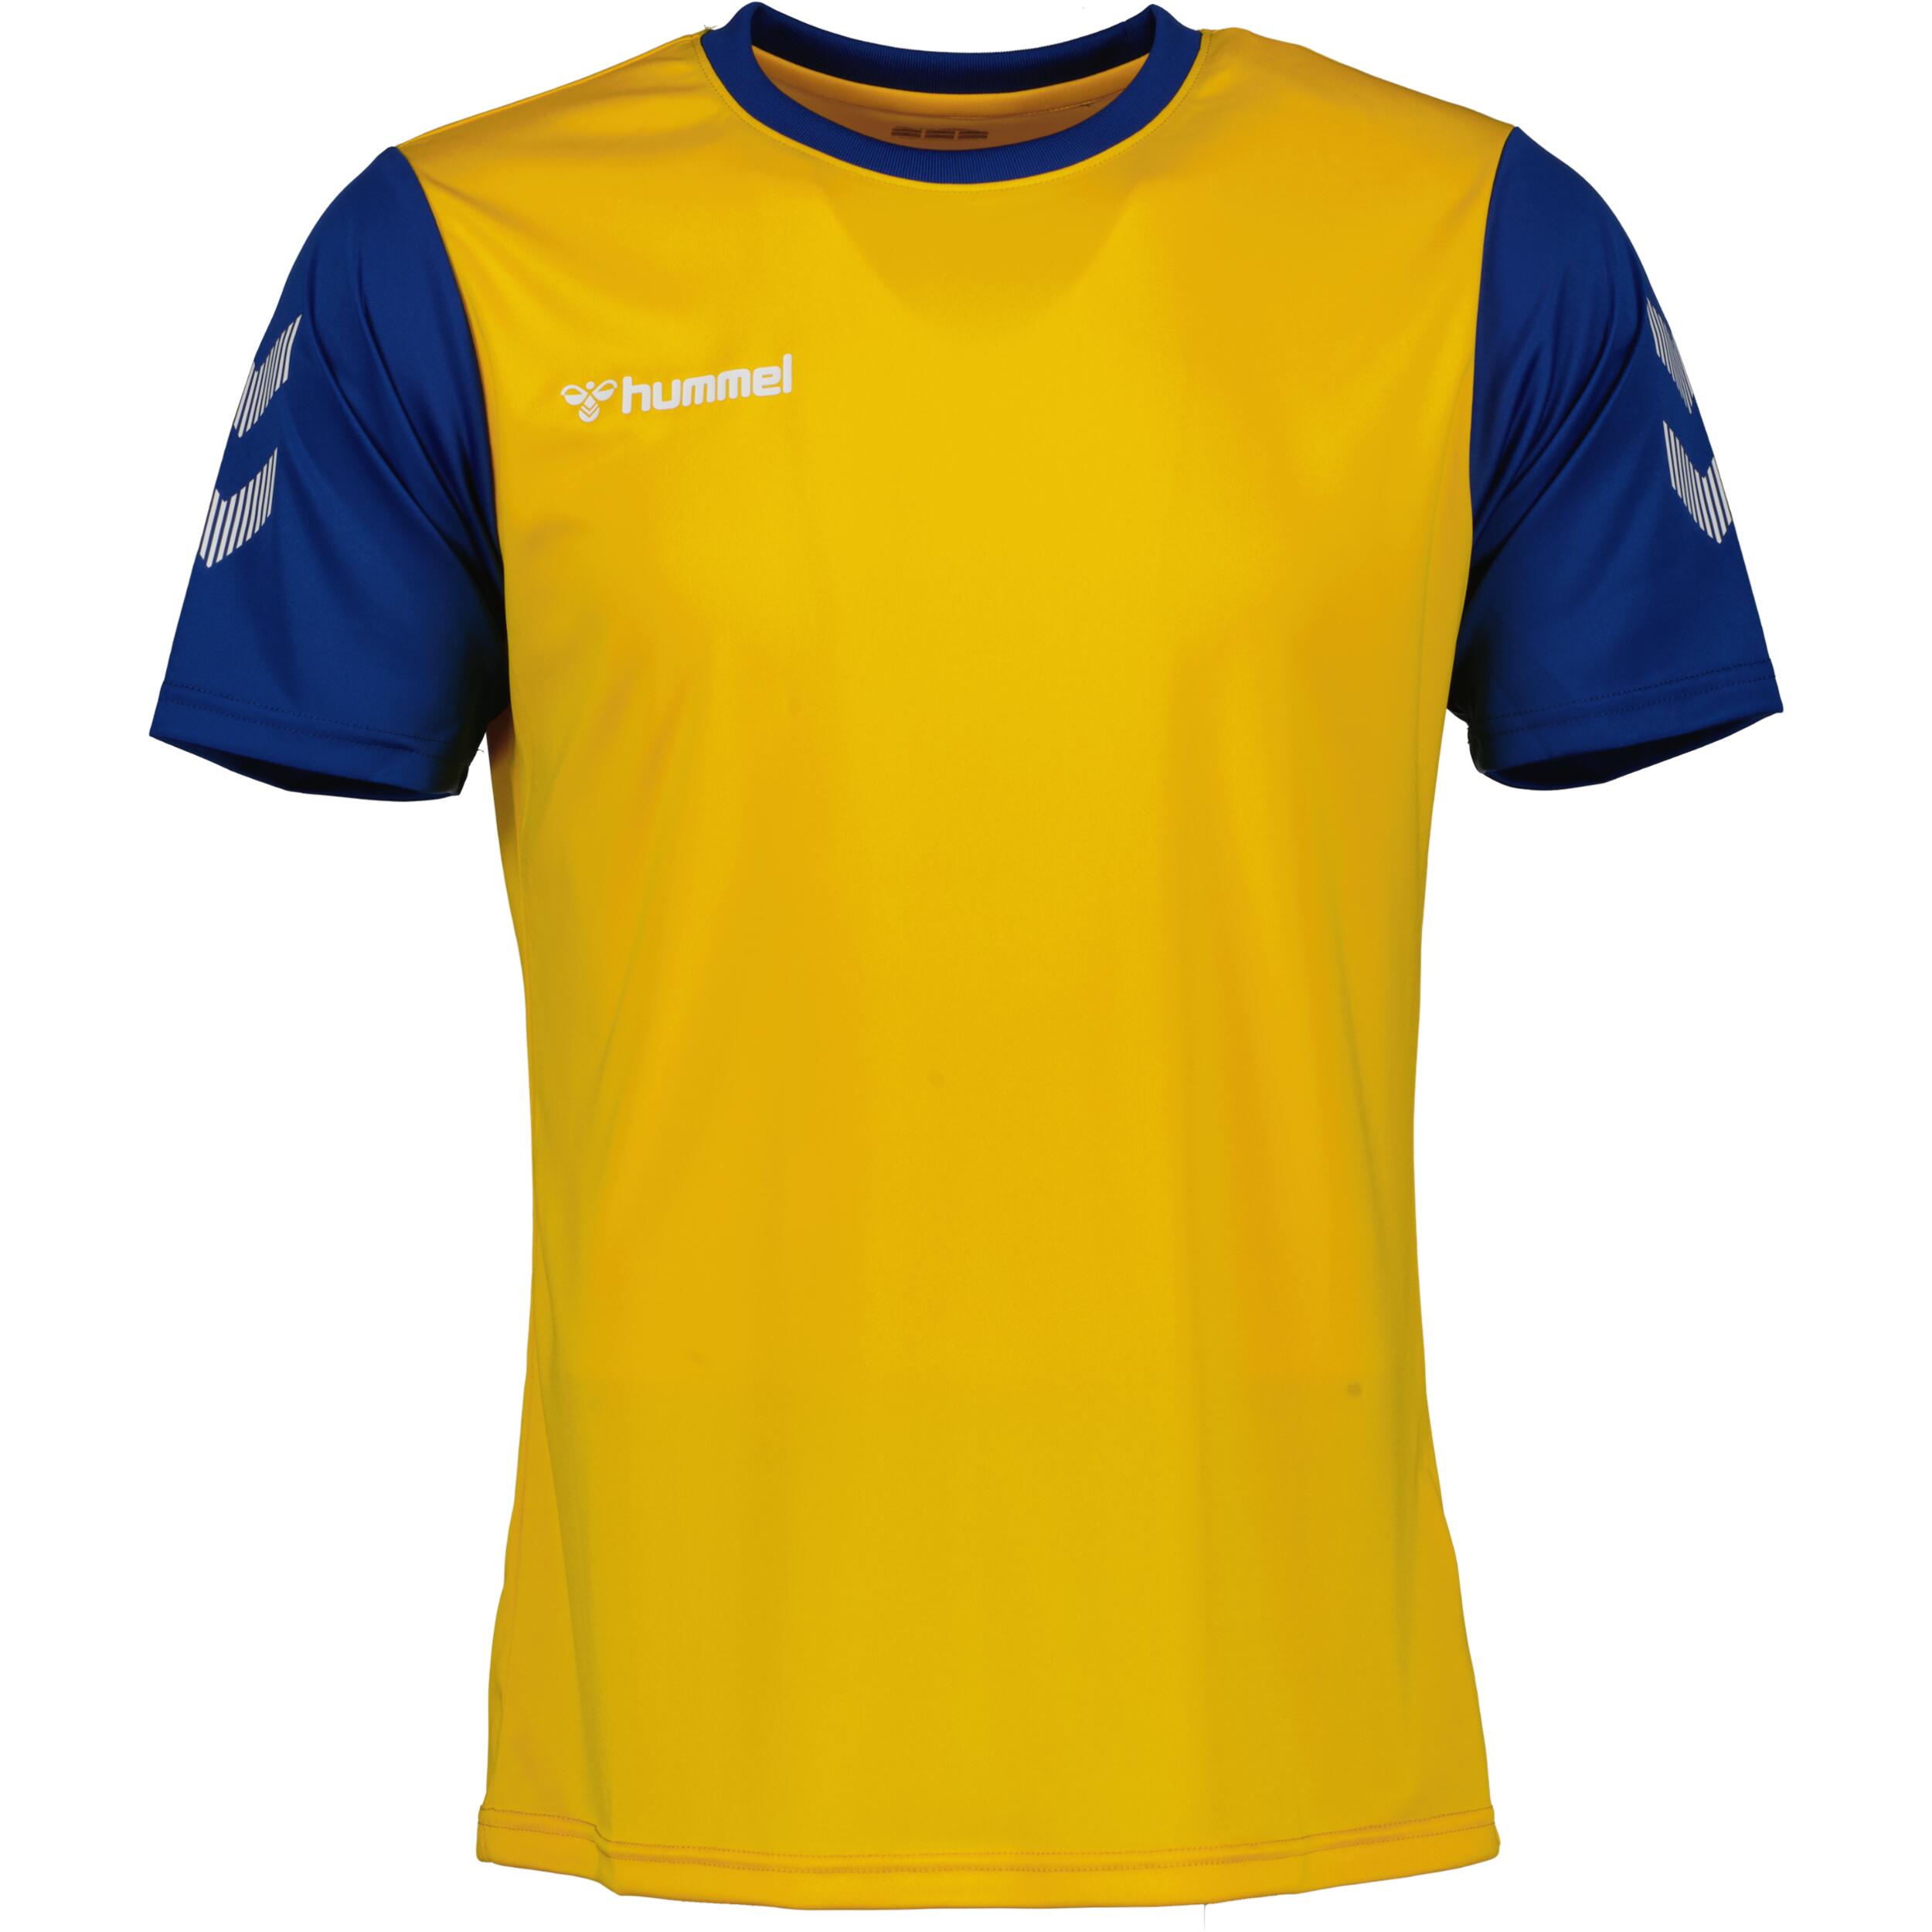 Match jersey for kids, great for football, in yellow/blue 1/3